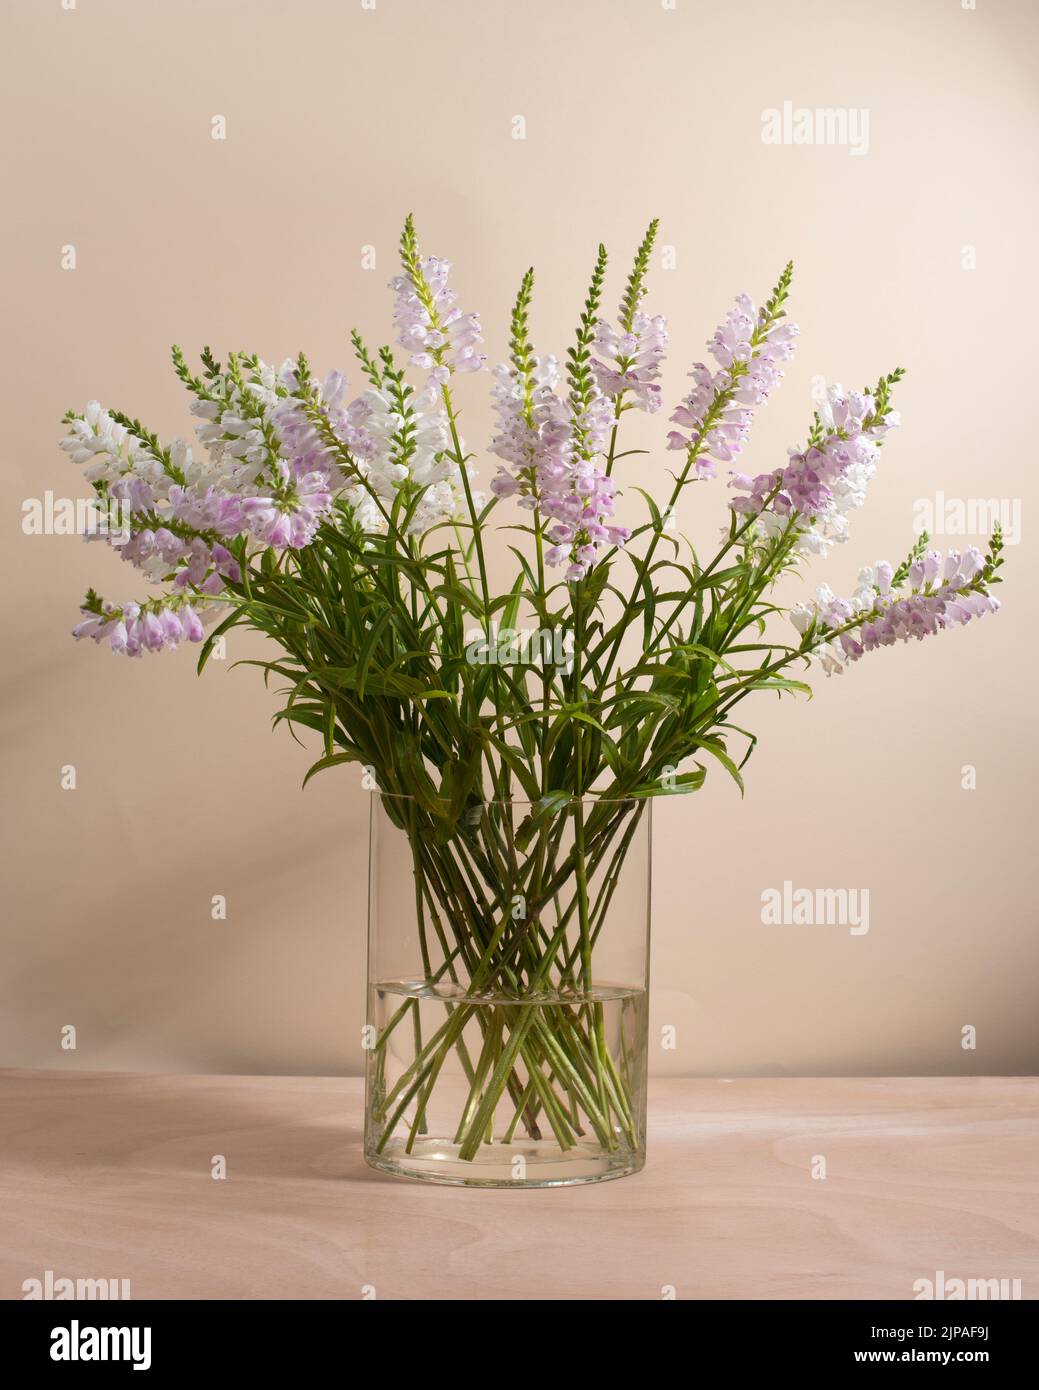 A bouquet of Obediant plants flowers in a vase on light beige background. Stock Photo